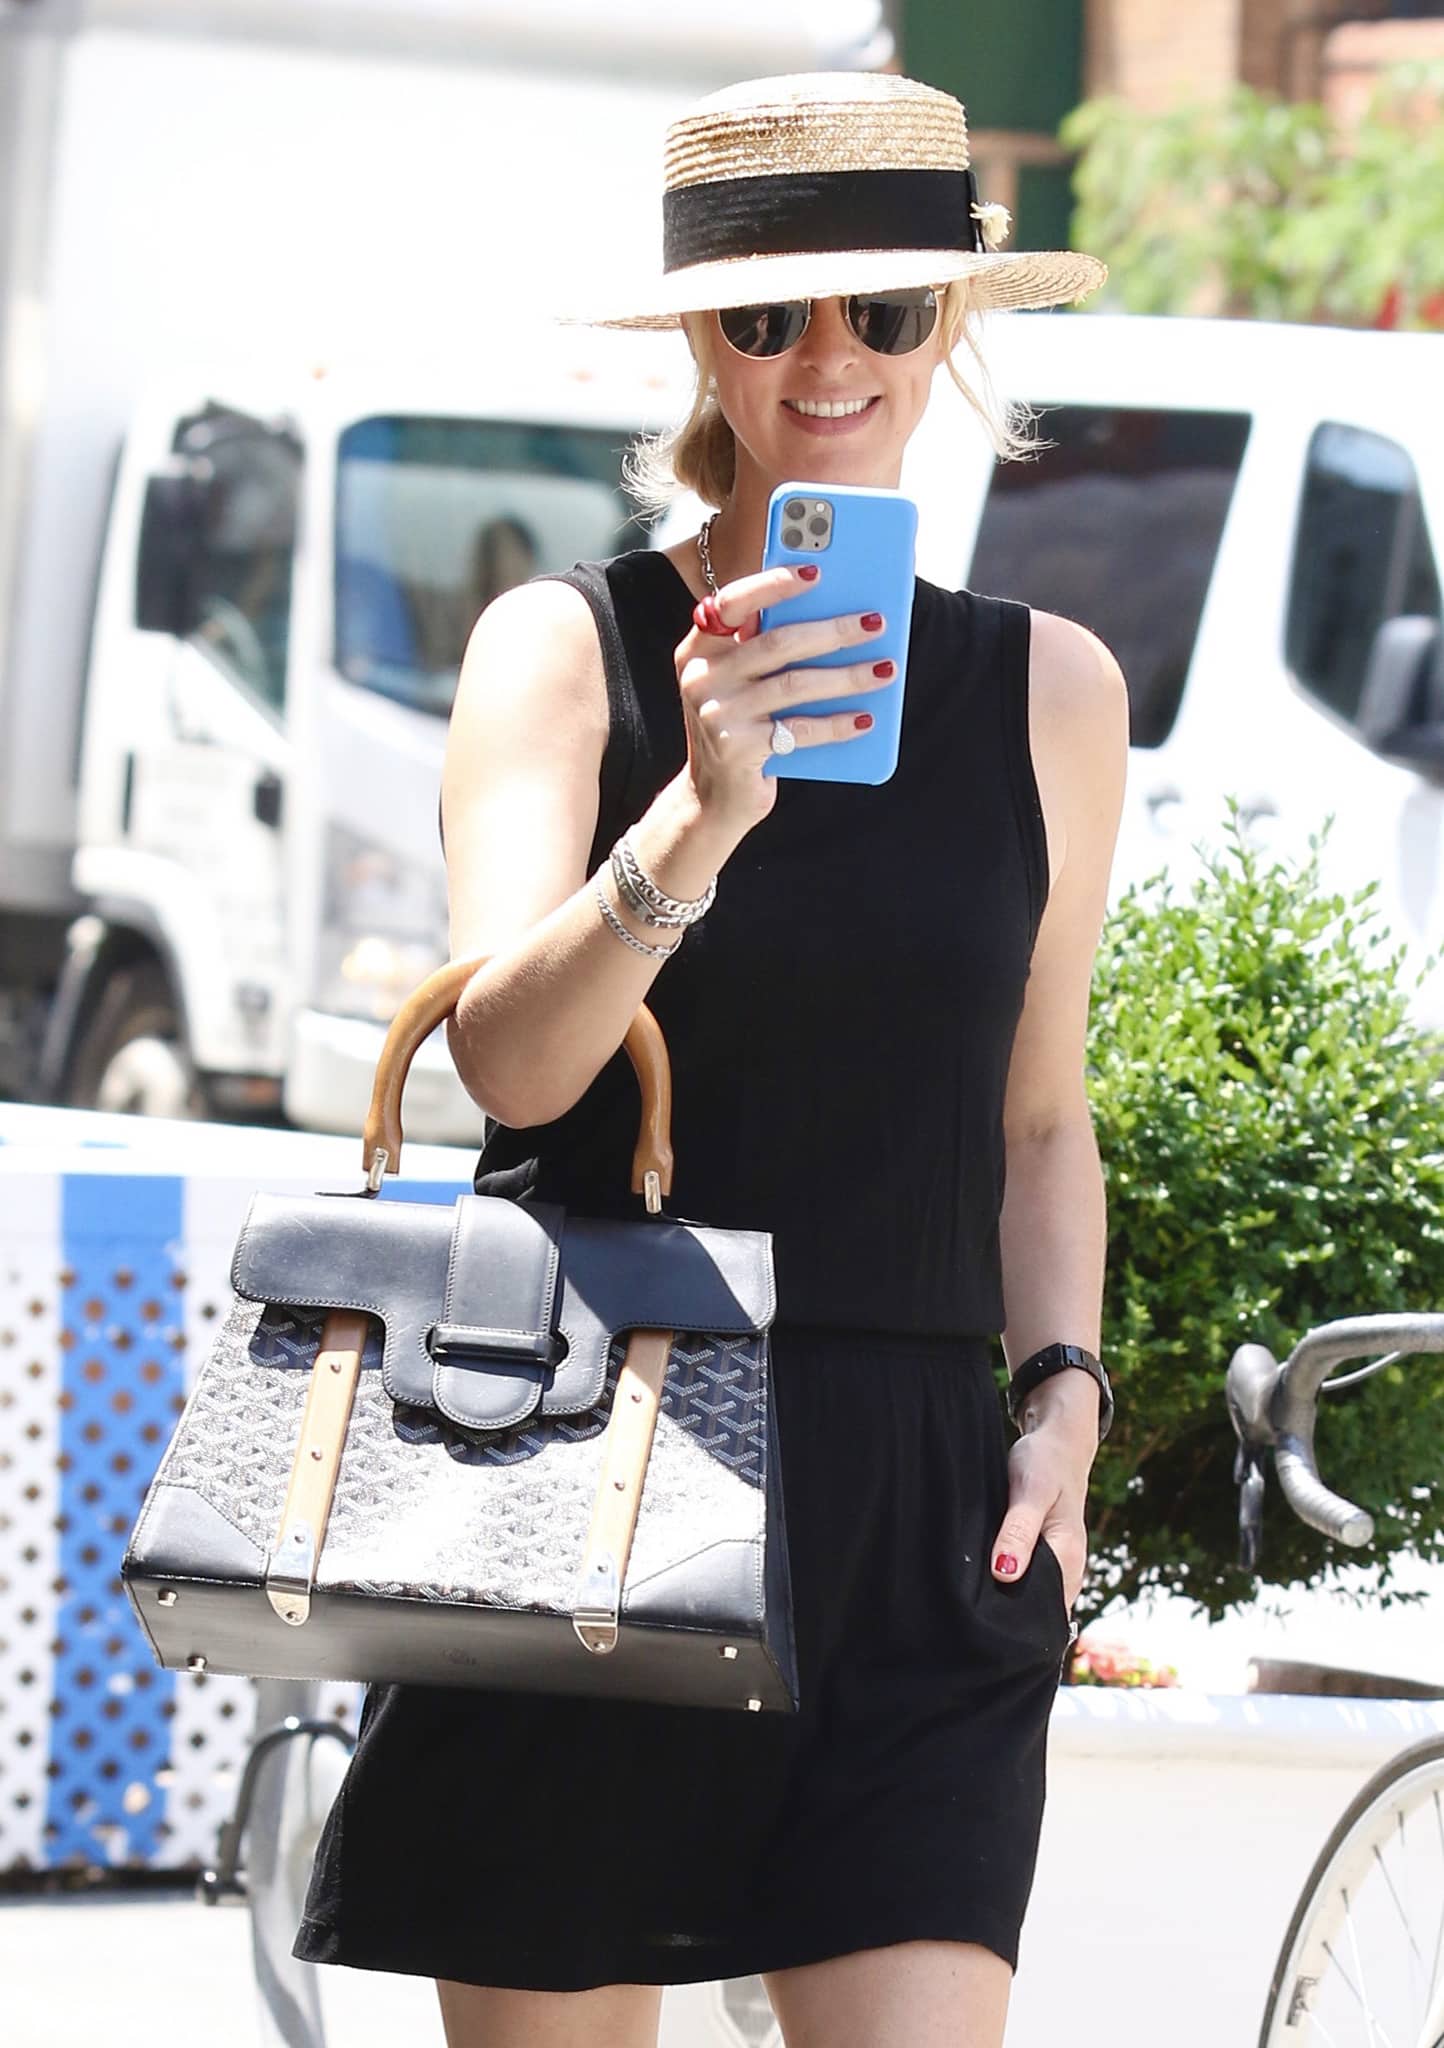 Nicky Hilton styles her summer outfit with a straw hat and a Goyard Saigon bag